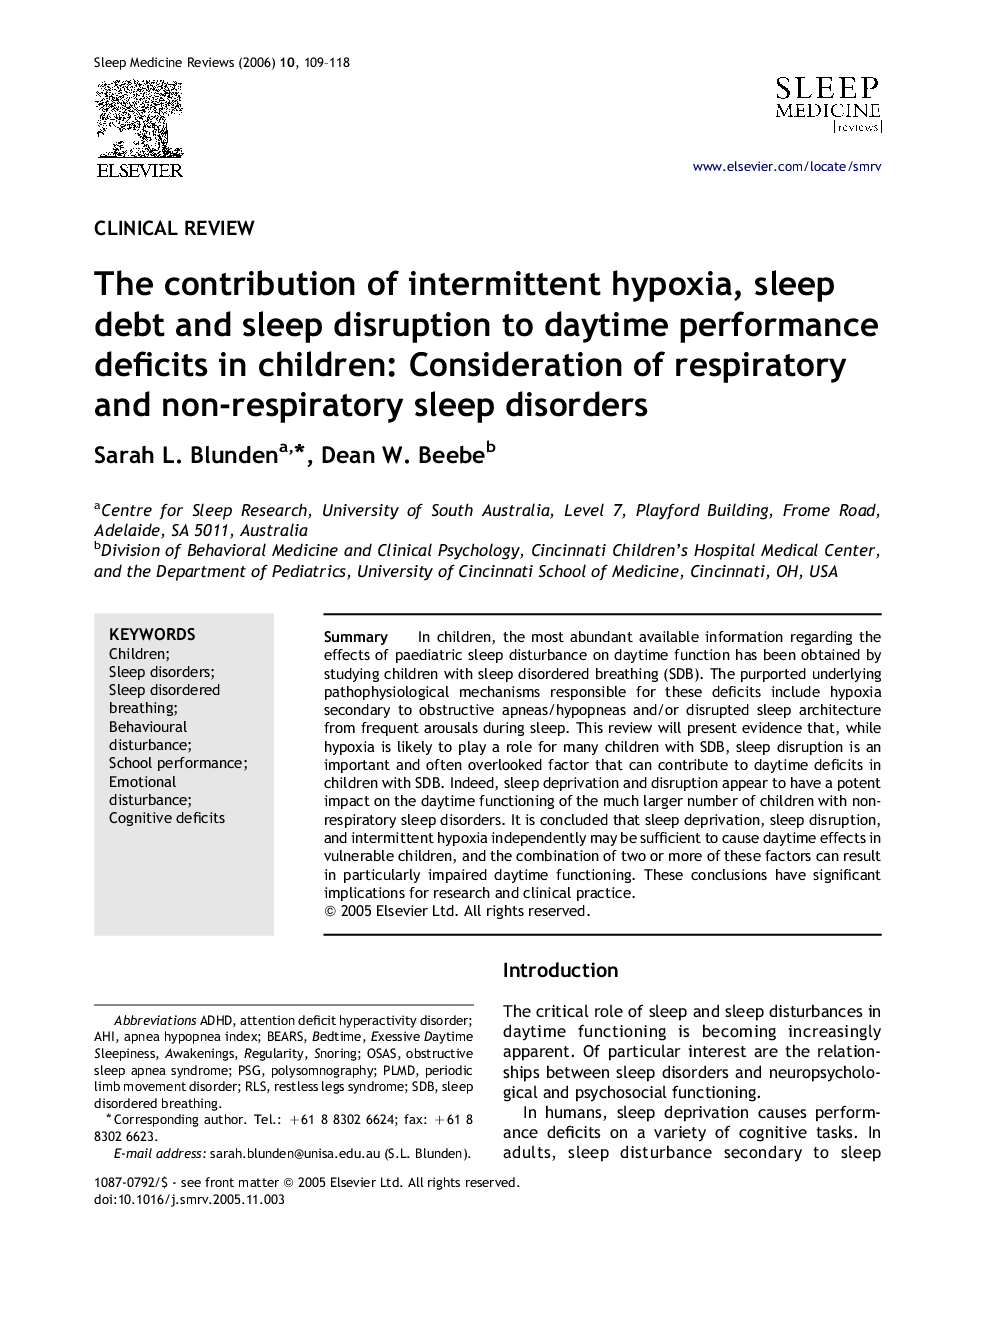 The contribution of intermittent hypoxia, sleep debt and sleep disruption to daytime performance deficits in children: Consideration of respiratory and non-respiratory sleep disorders